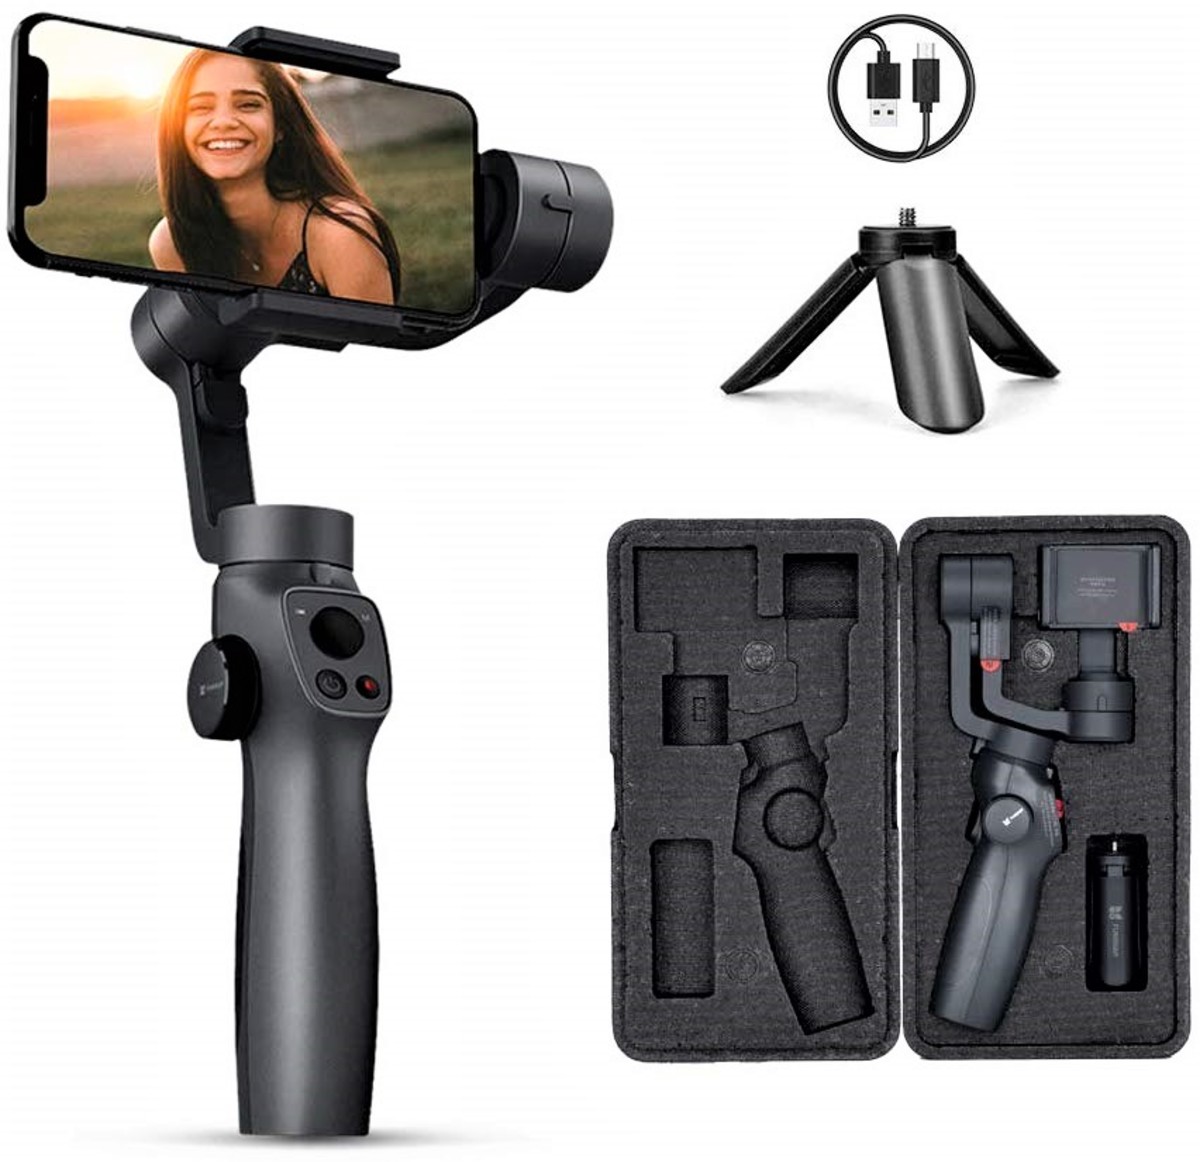 funsnap-capture-2-review-the-essential-youtube-vlog-camera-stabilizer-youve-never-heard-of